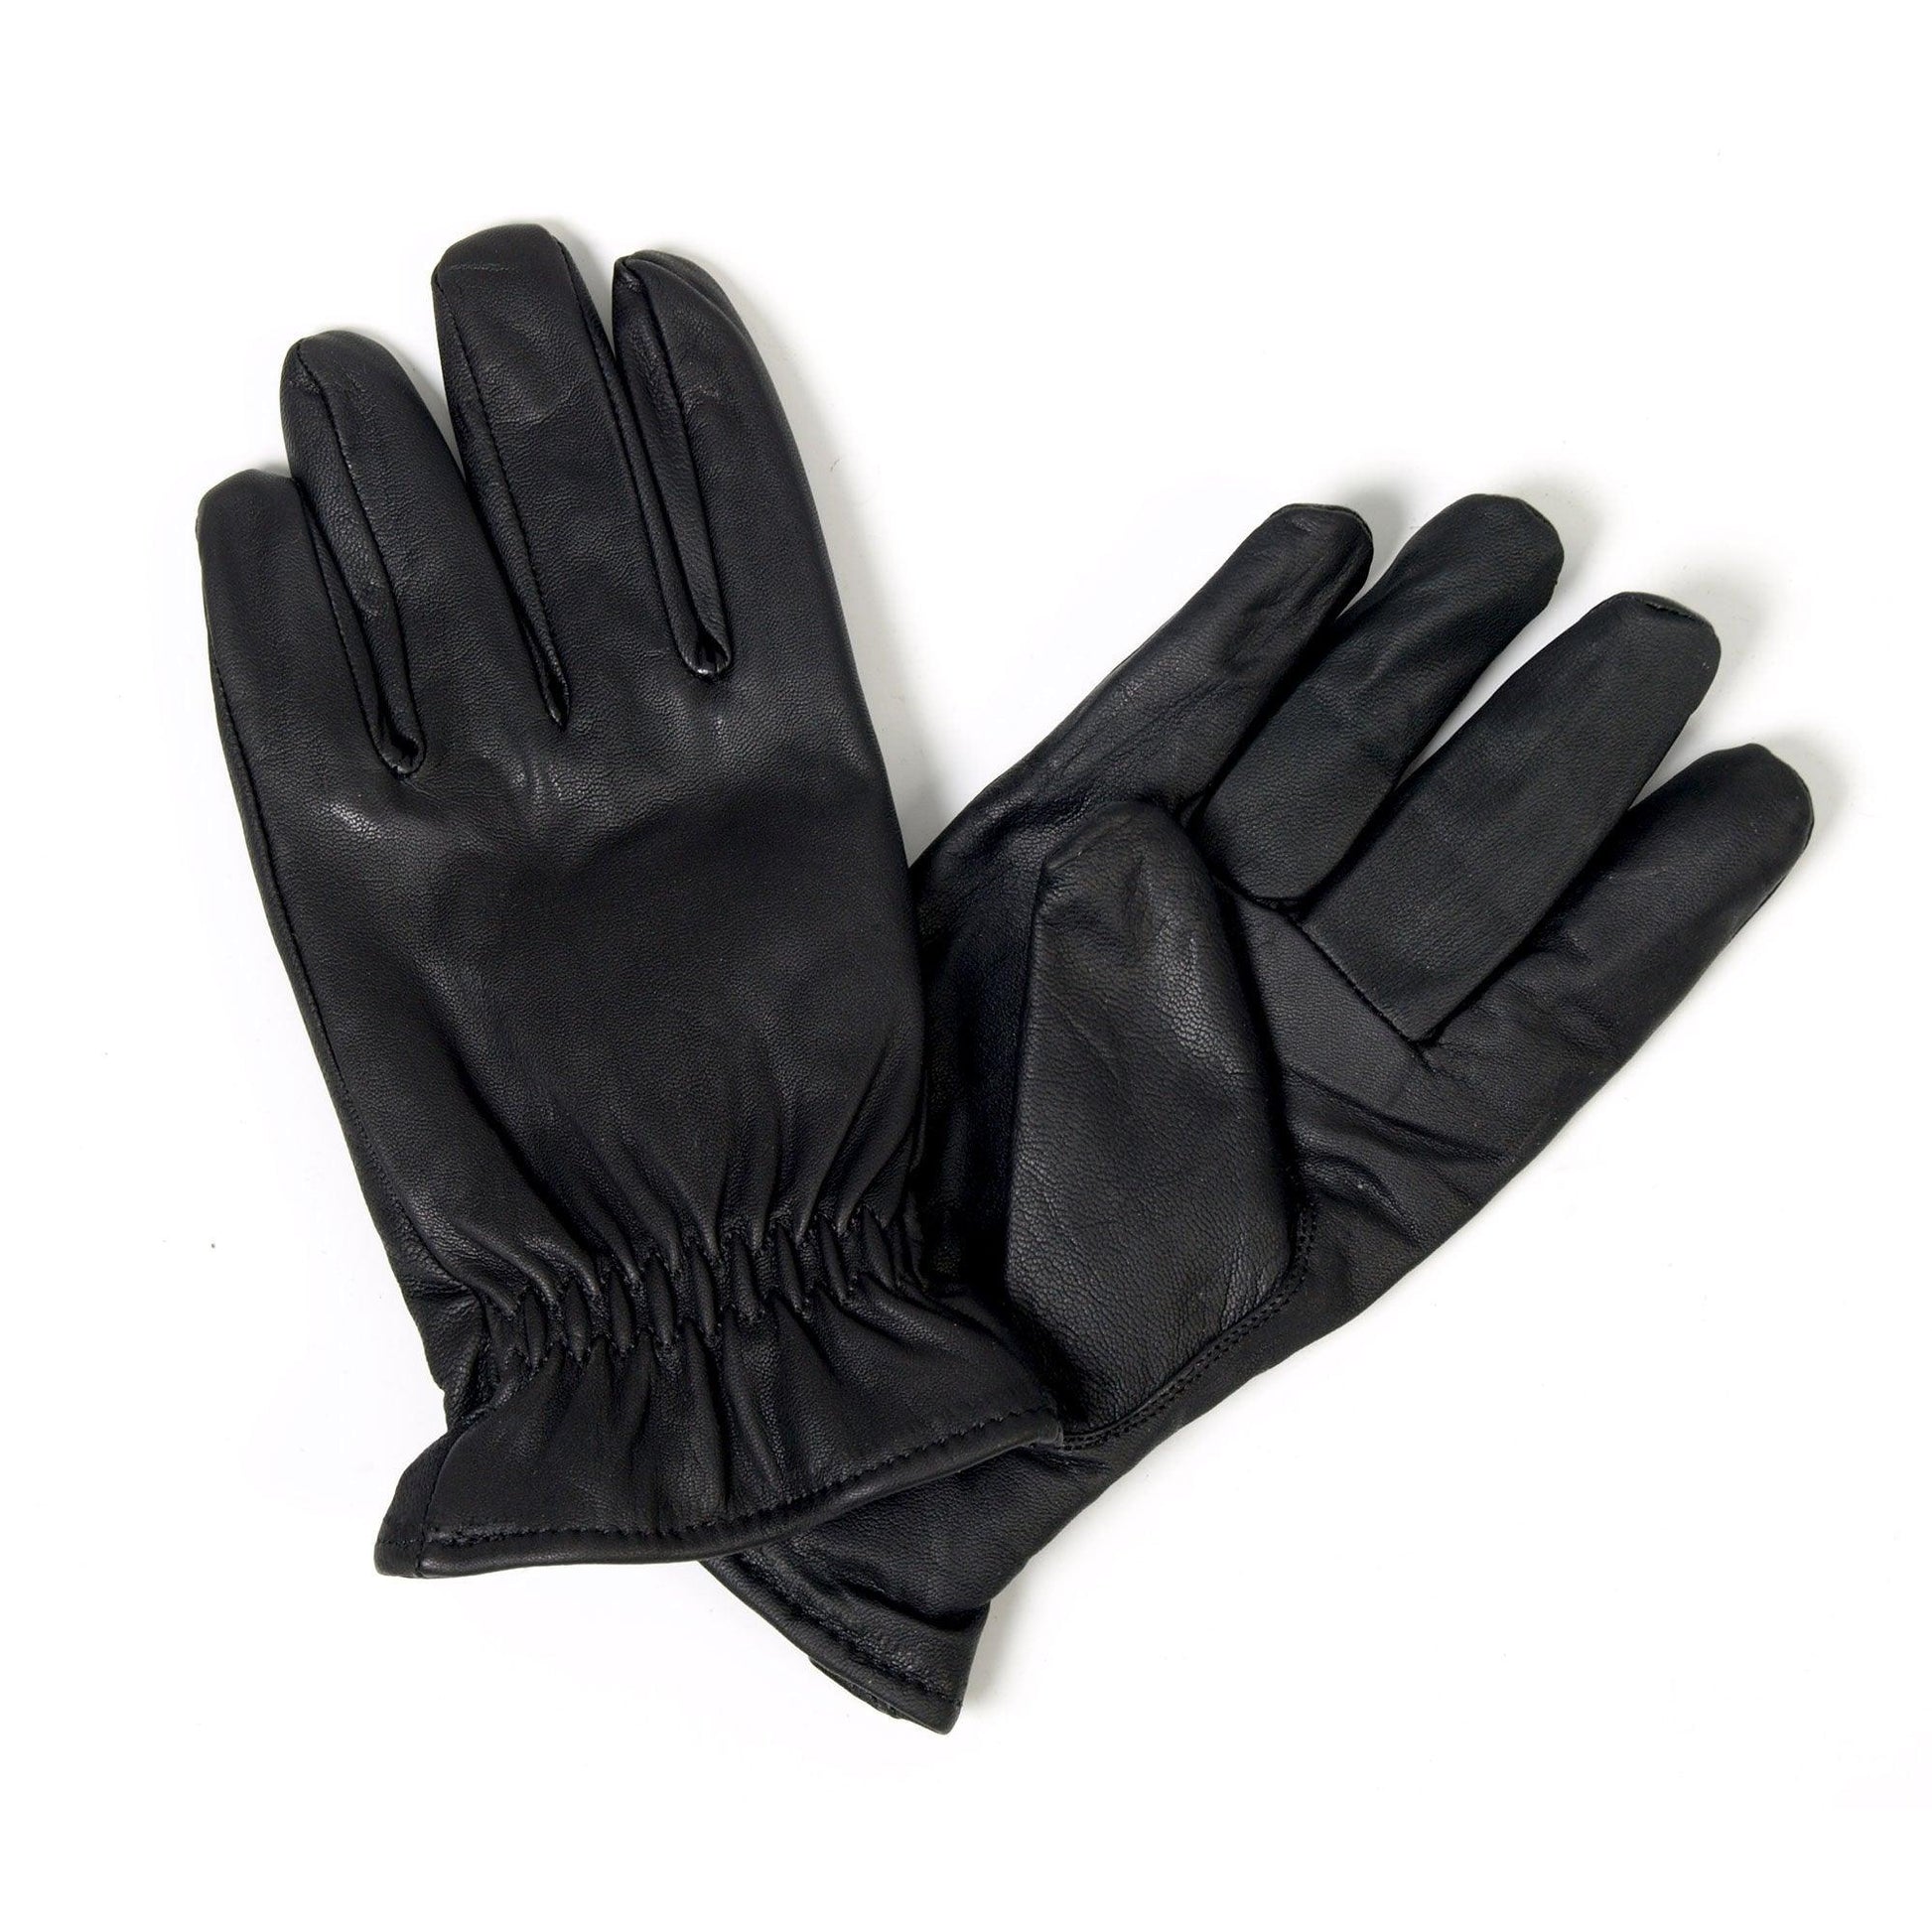 Waterproof Leather Riding Glove - Unisex - Military Republic